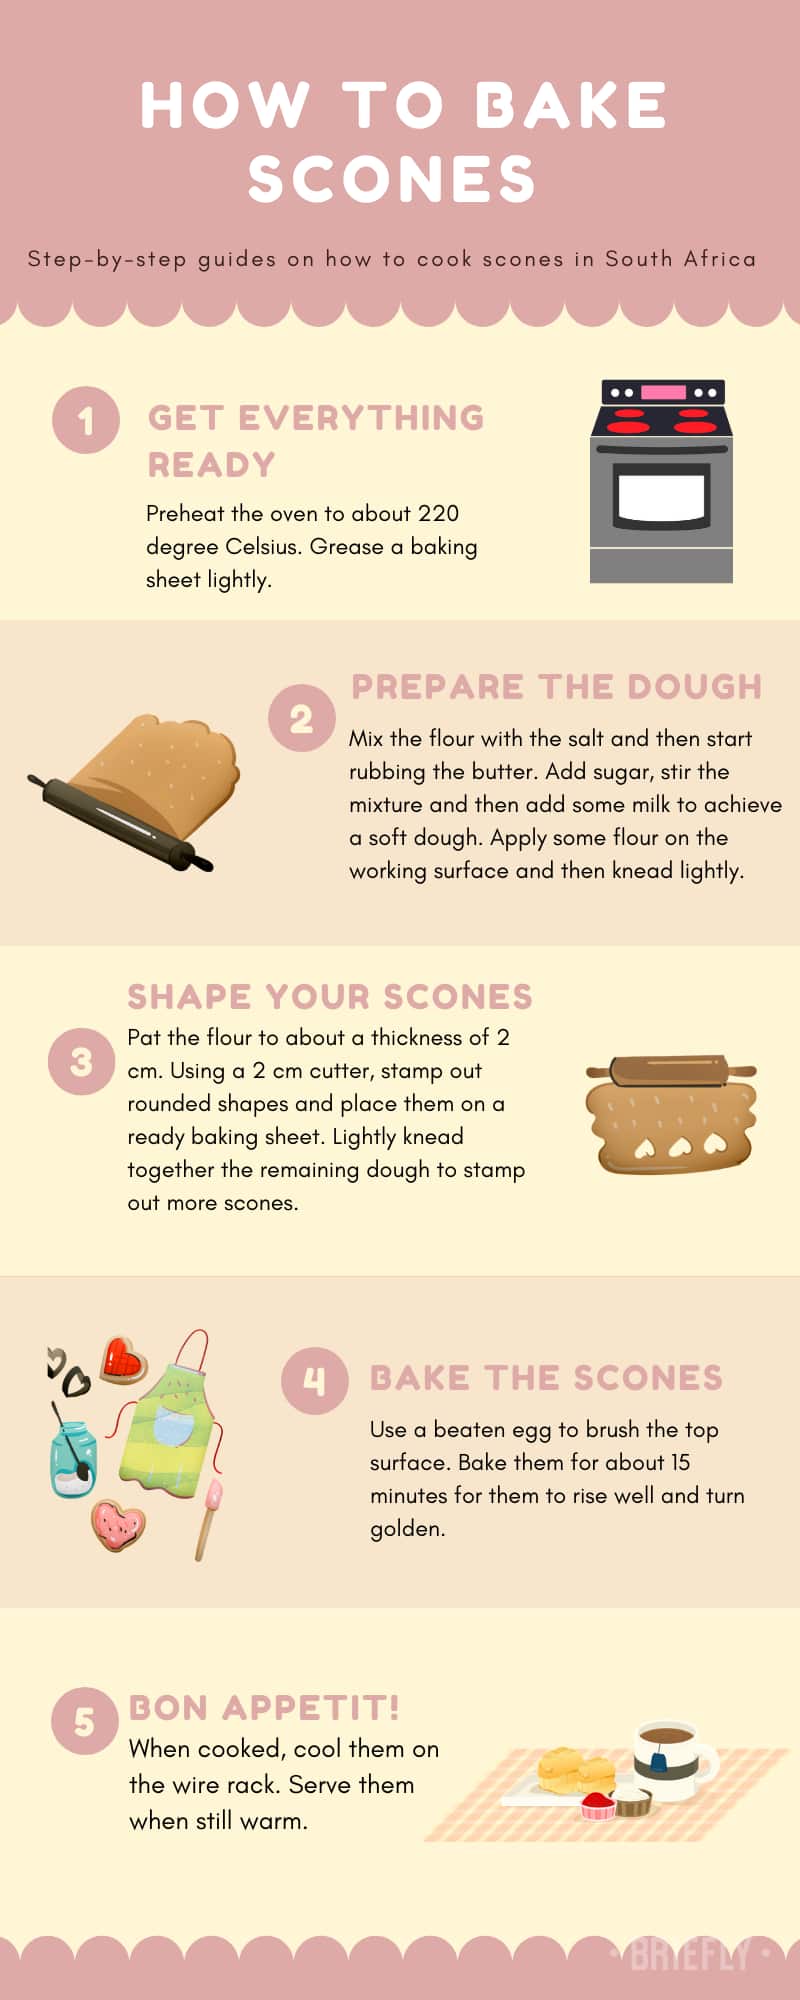 How to bake scones in South Africa